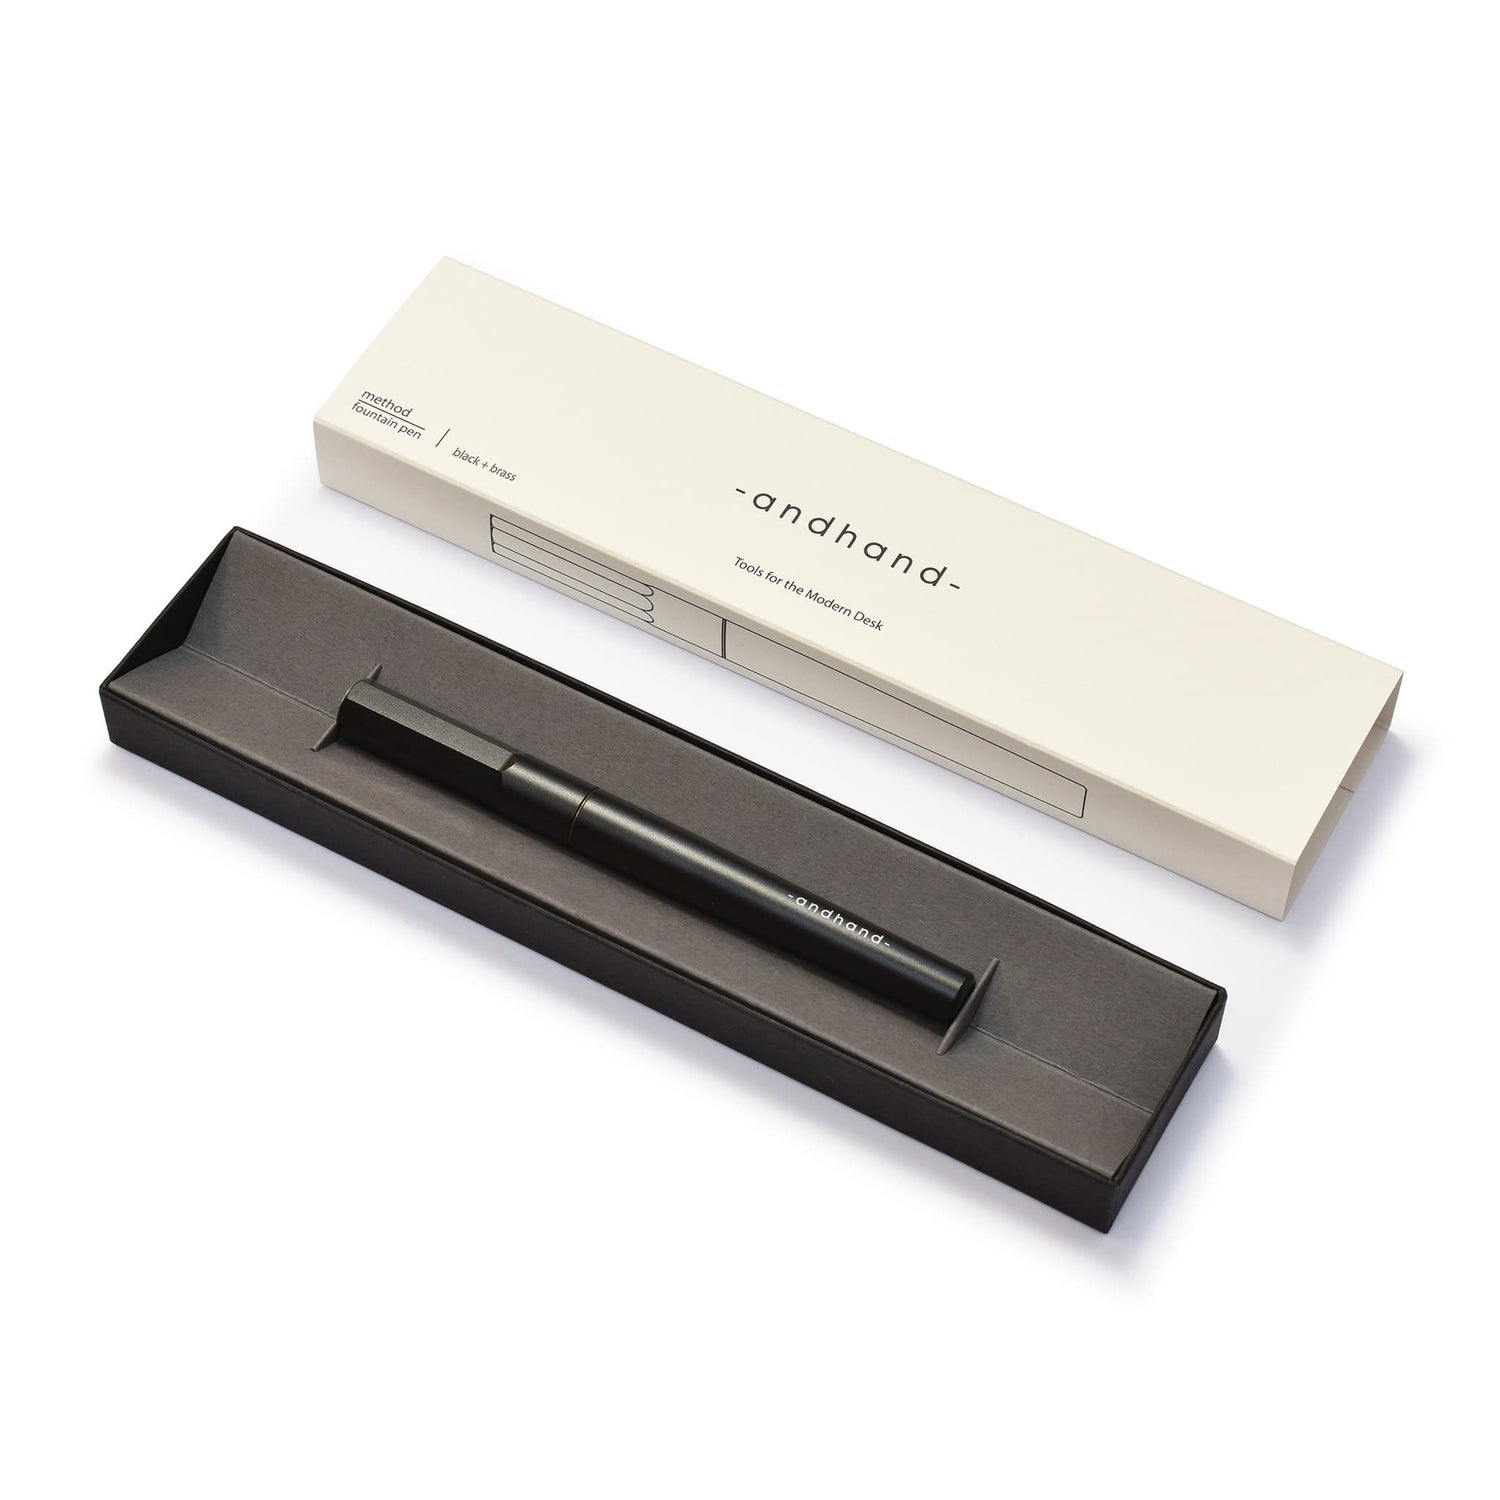 Andhand black and brass fountain pen, shown here with its crisp modern presentation box.